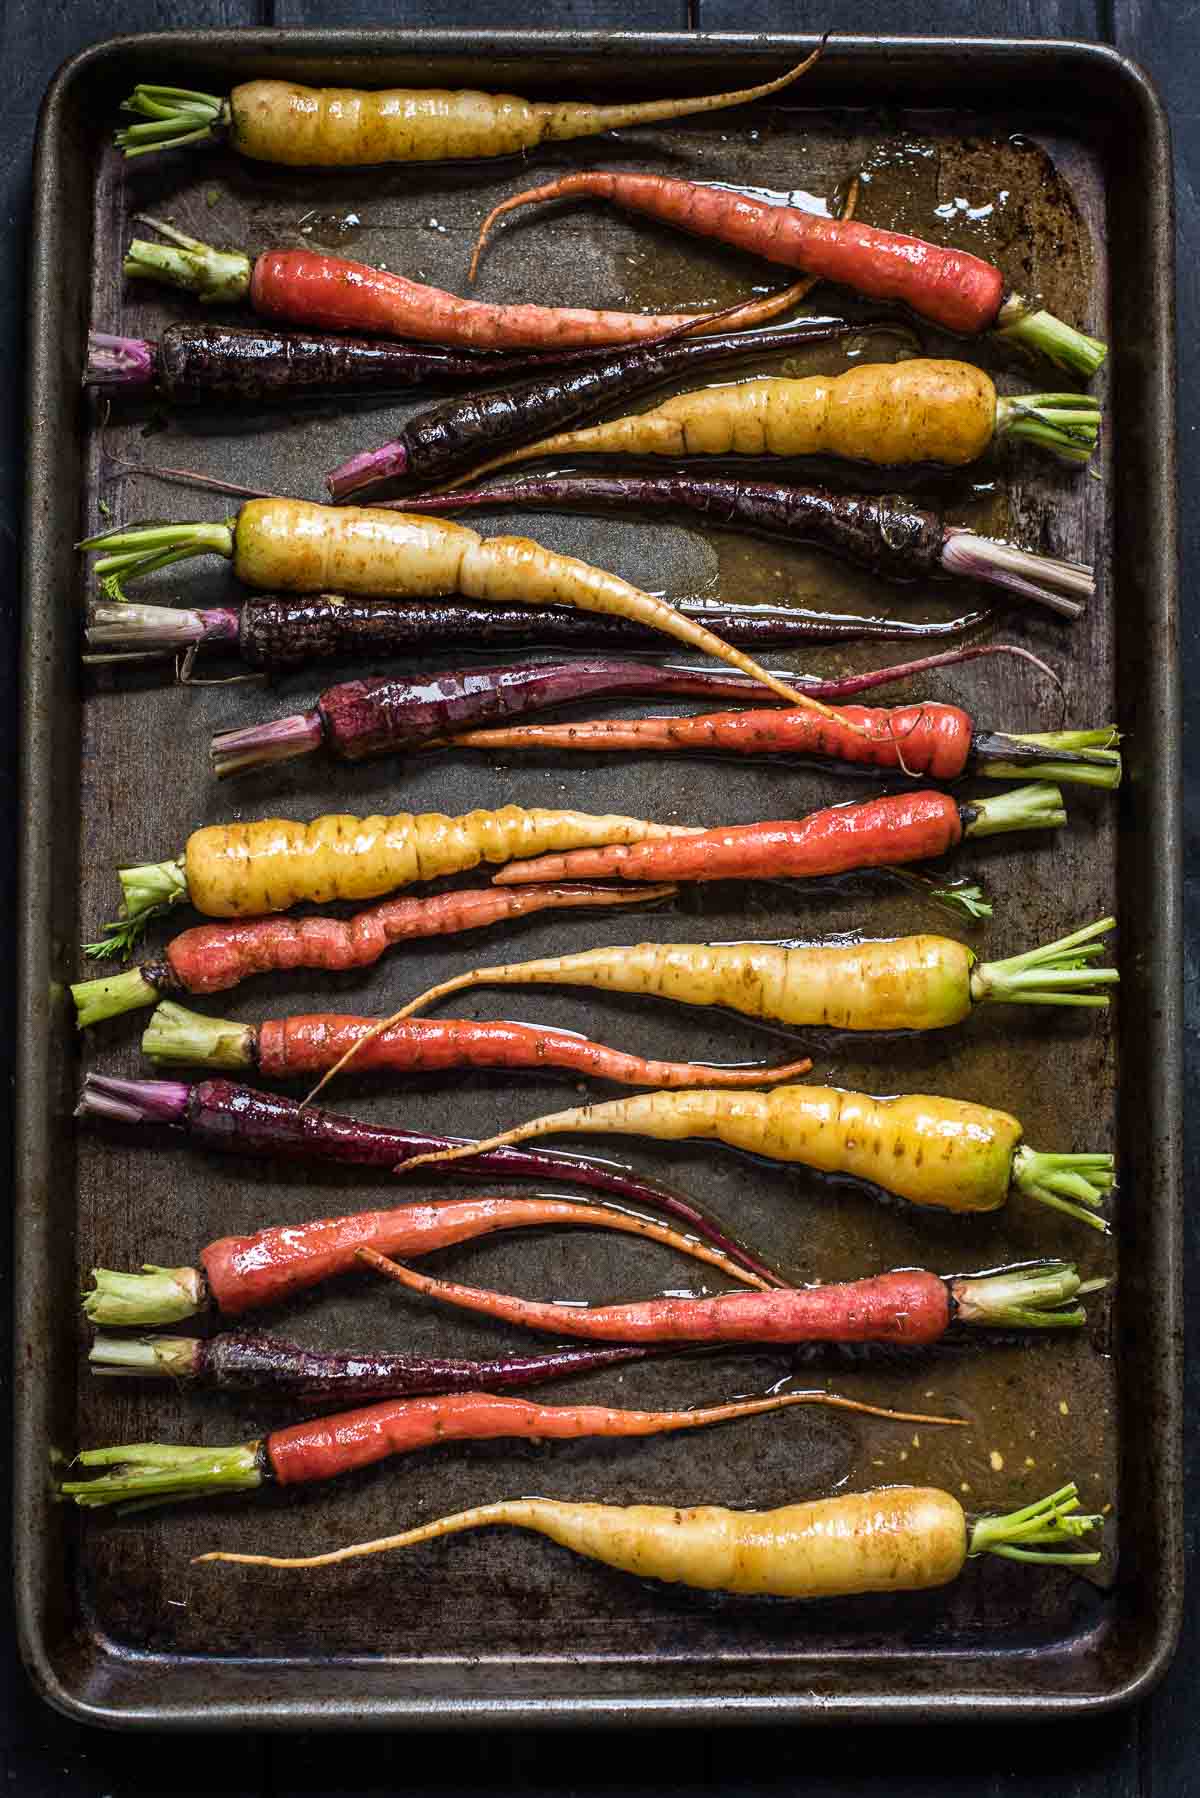 Whole roasted baby carrots are an easy, beautiful side dish.